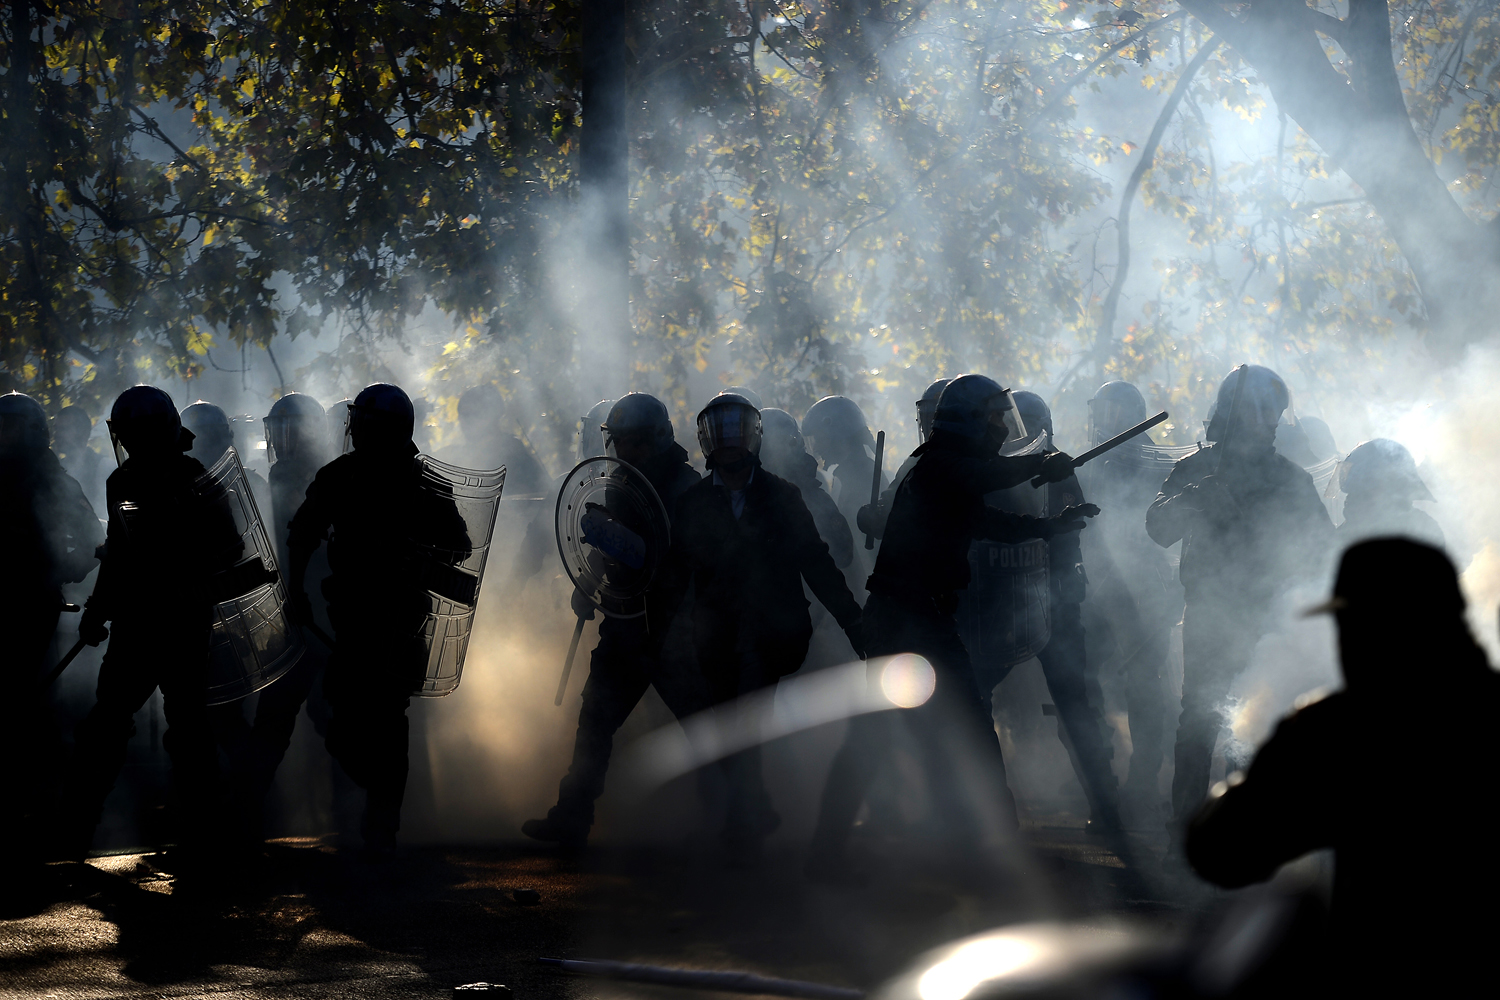 Image: Nov. 14, 2012. Demonstrators fights with riot policemen during a protest on a day of mobilization against austerity measures by workers in Rome.